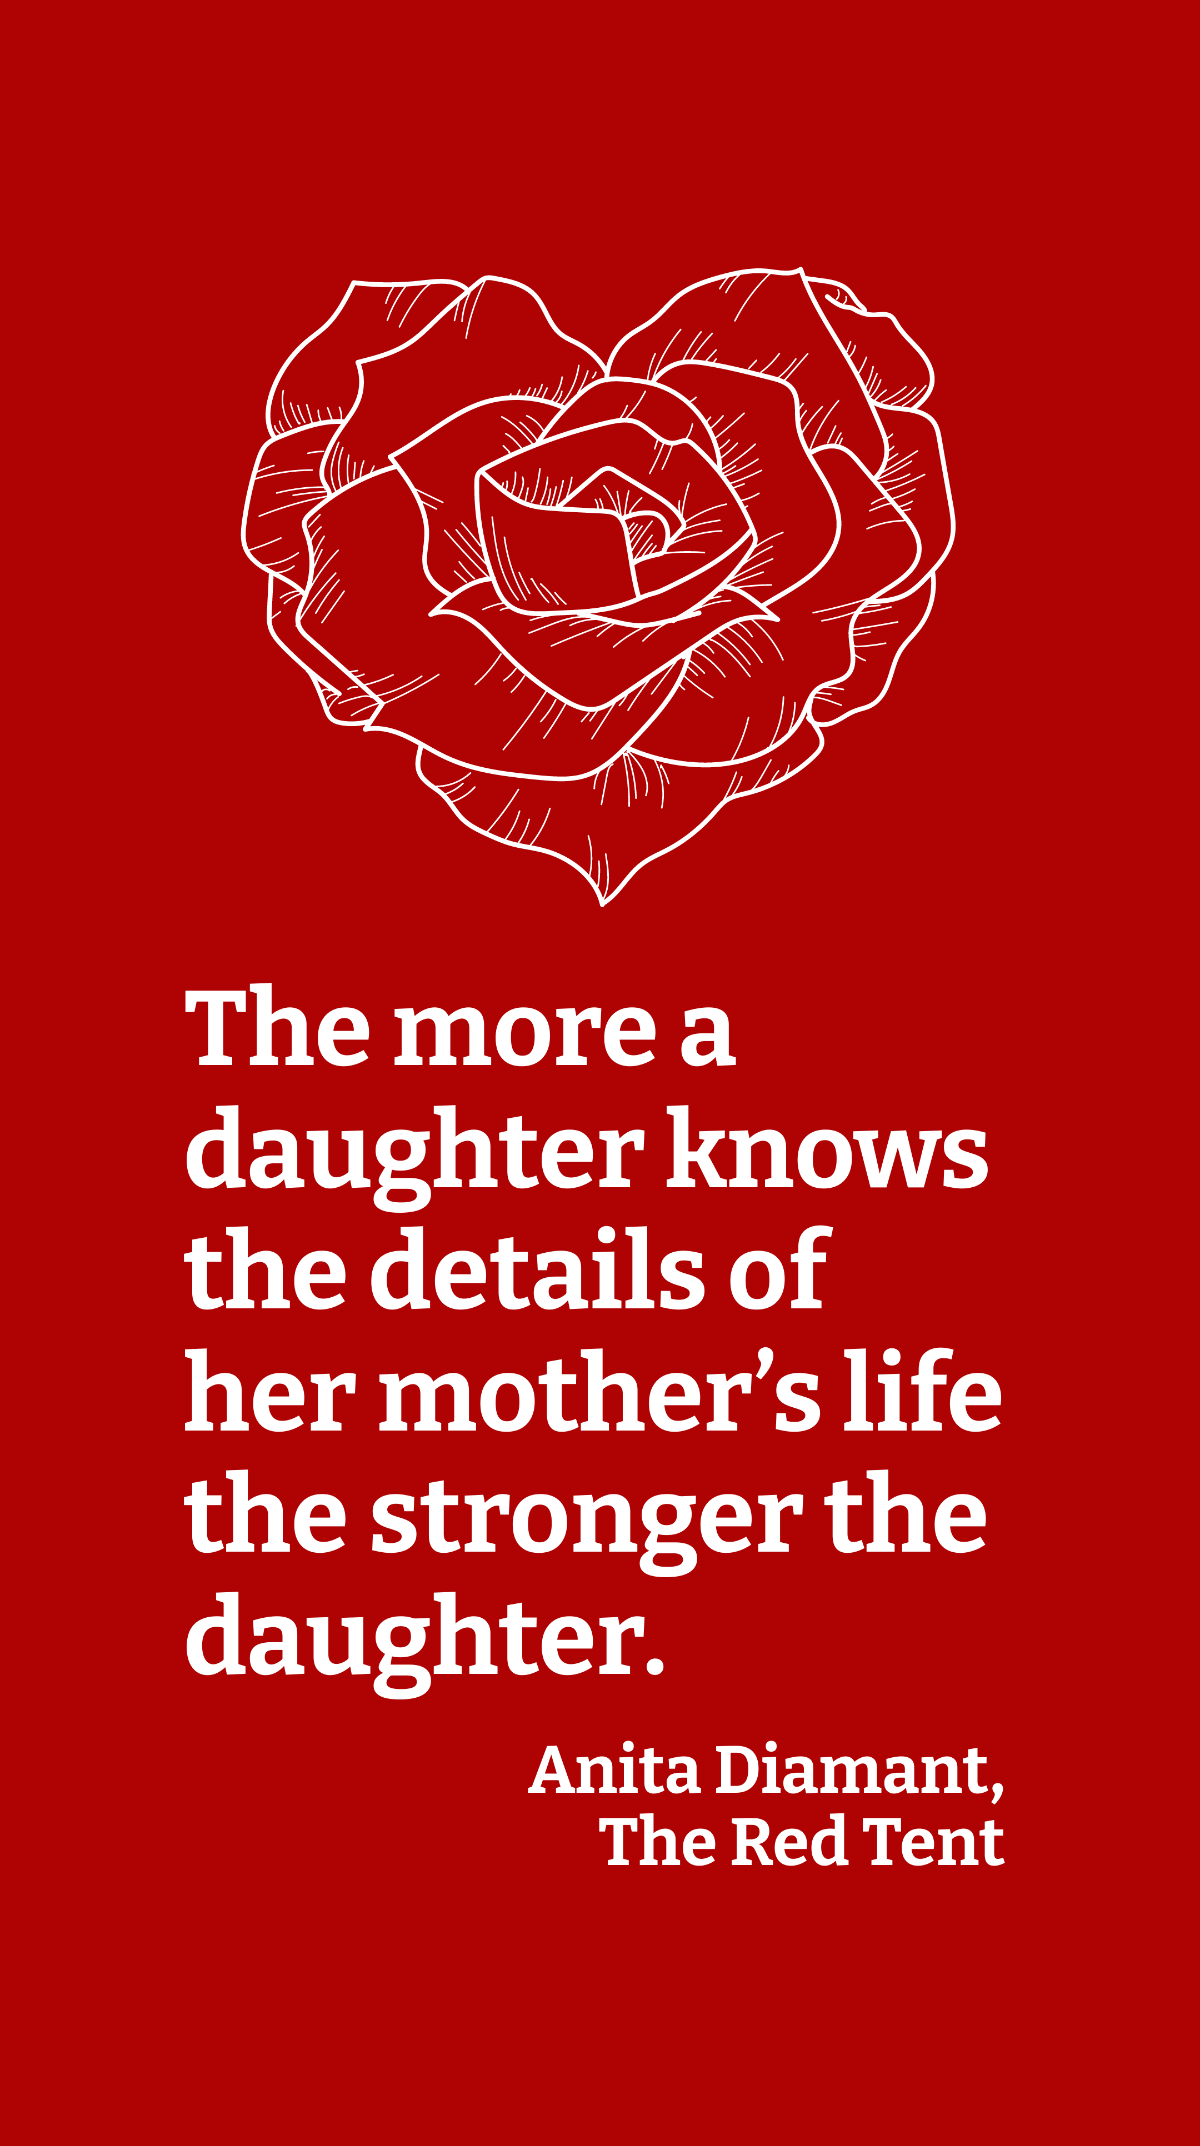 Anita Diamant, The Red Tent - The more a daughter knows the details of her mother’s life the stronger the daughter. Template